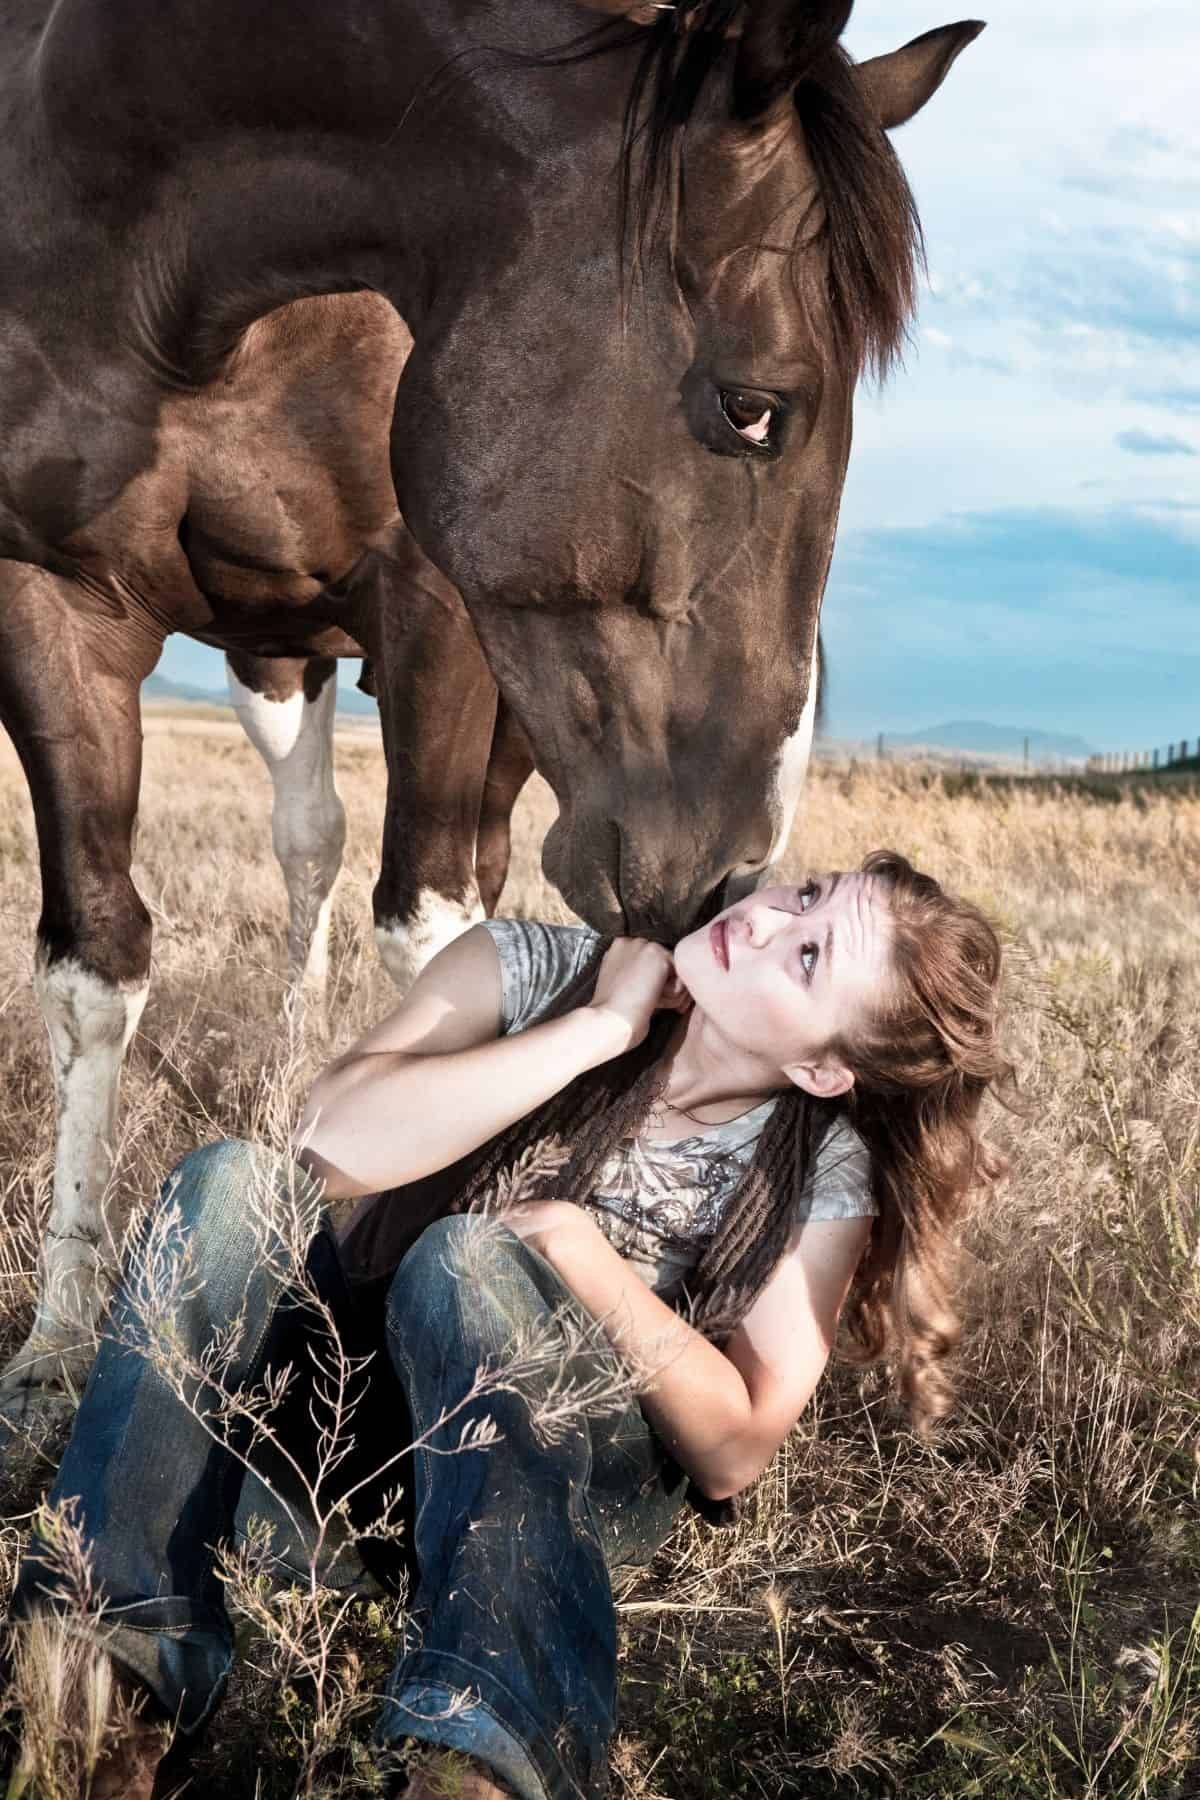 Brunette girl sitting on ground with horse above givin gkiss